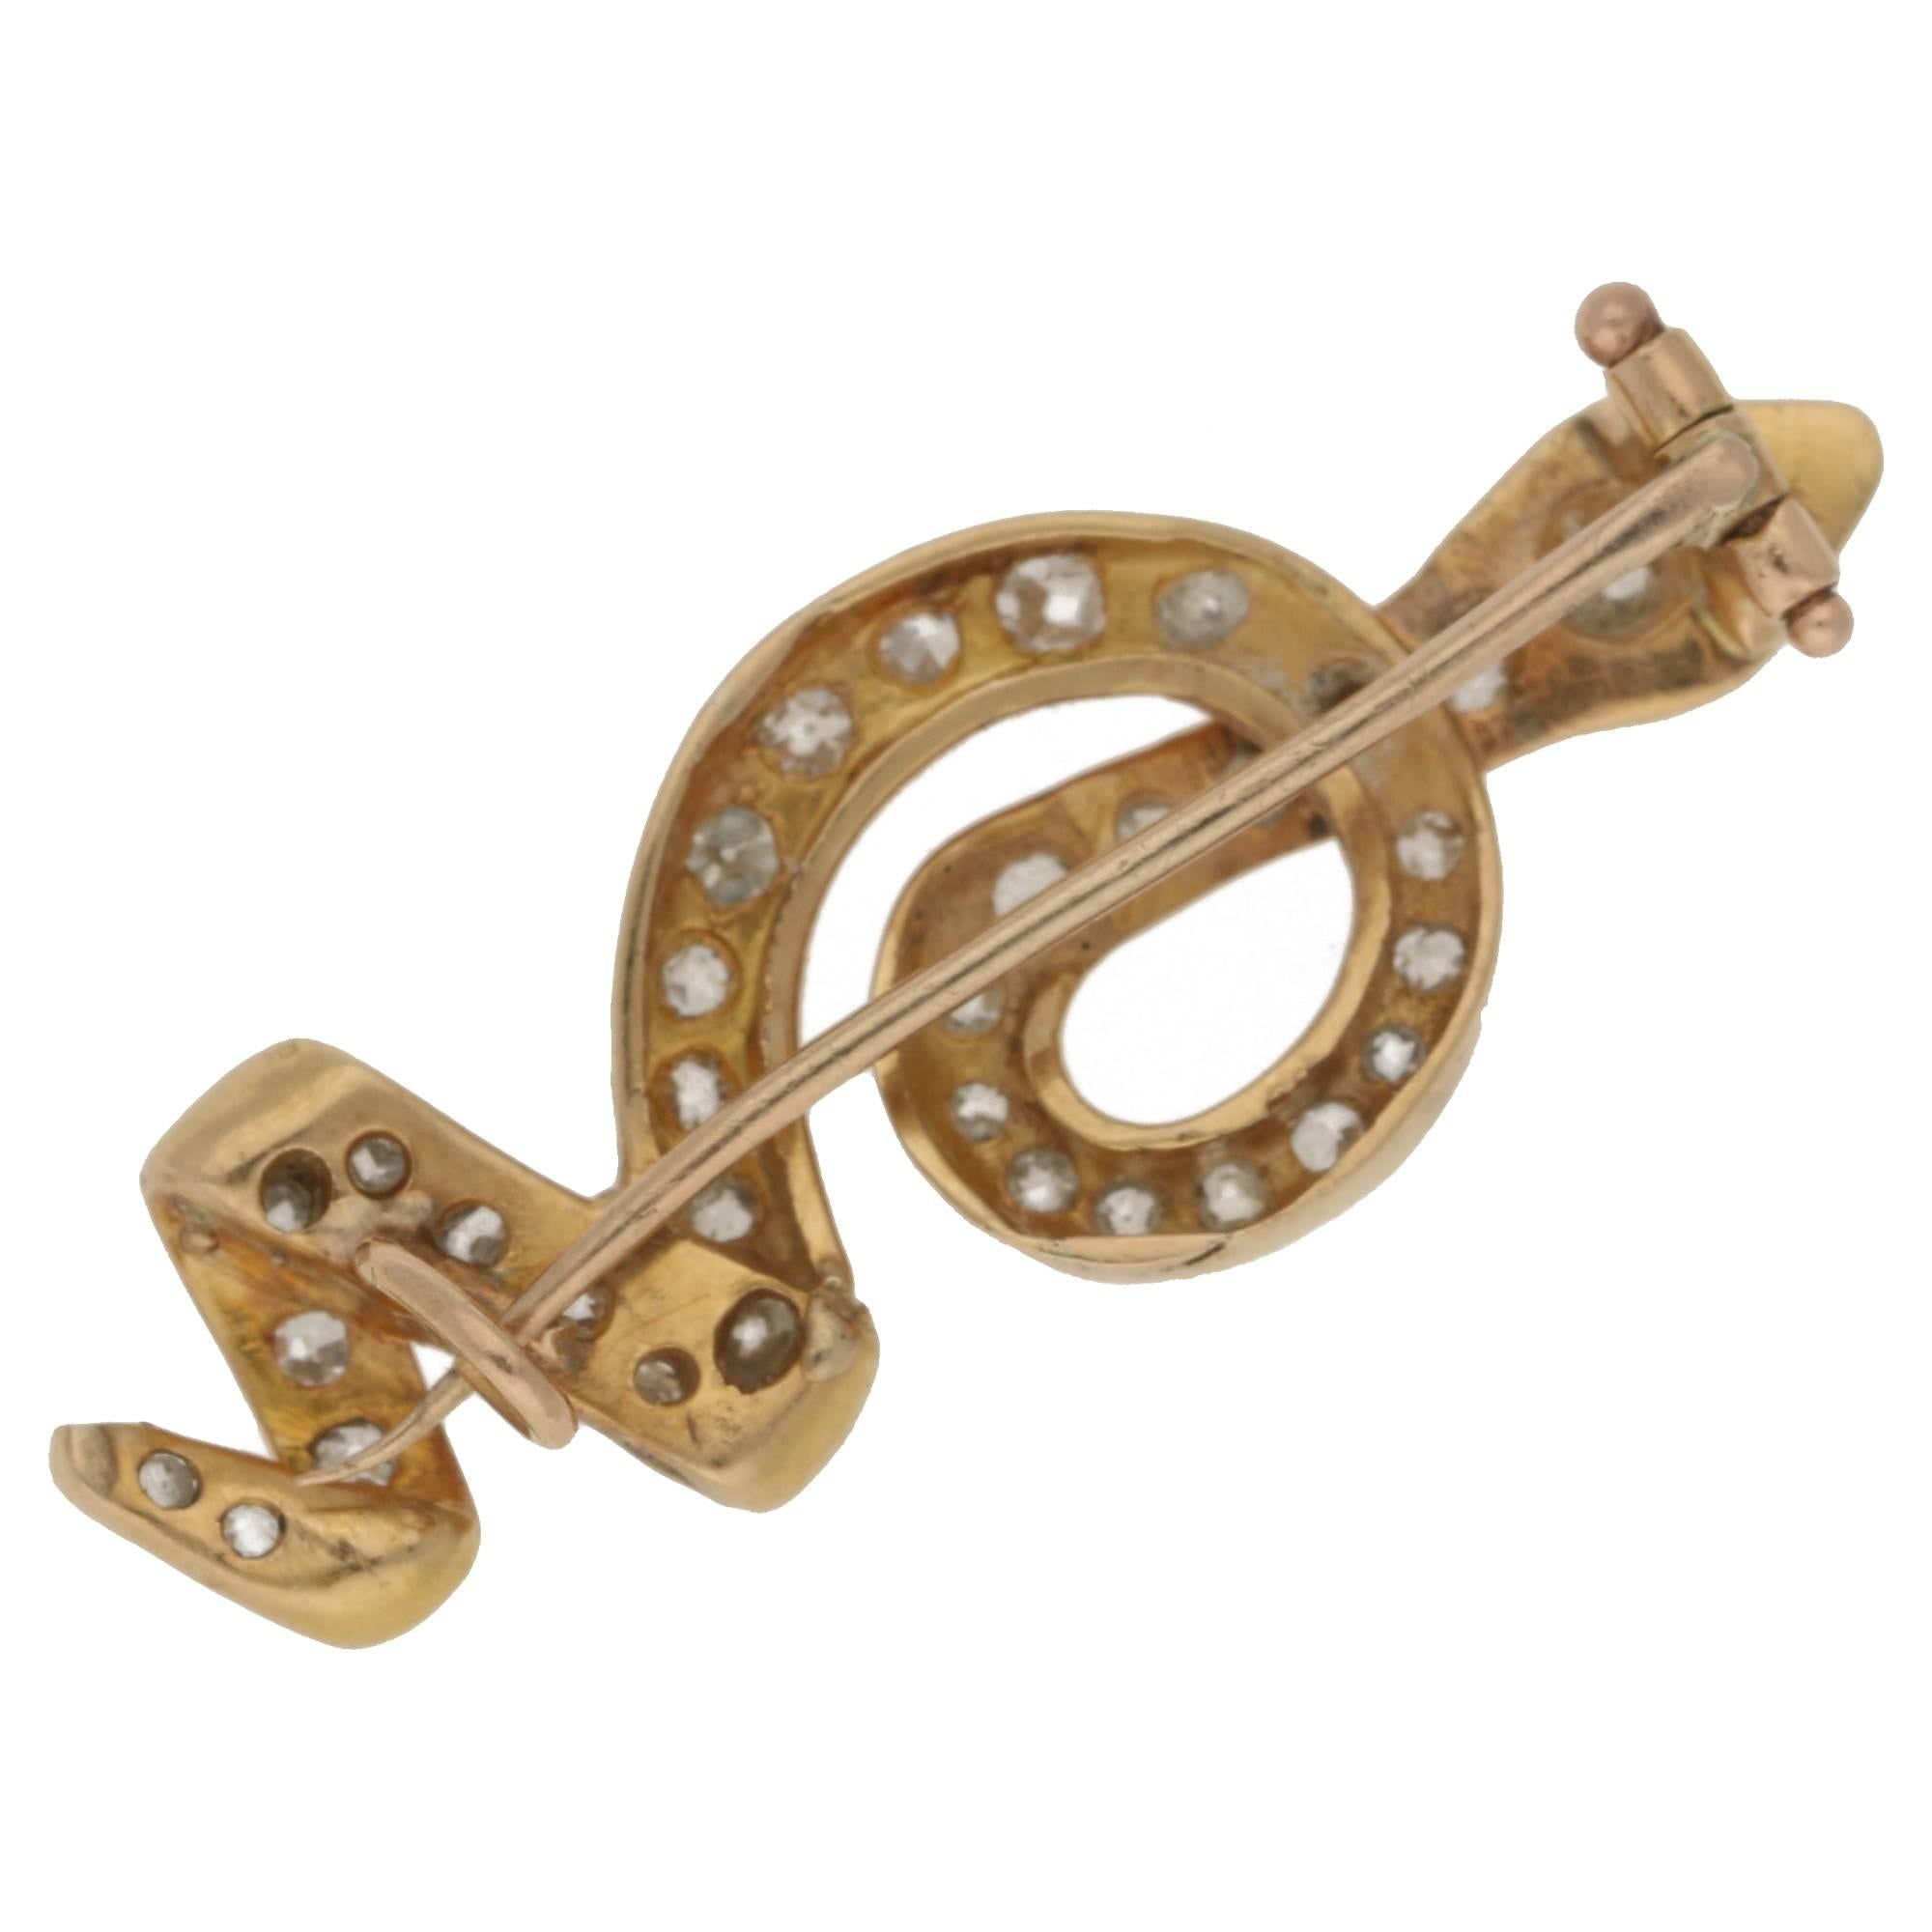 A mid-20th century snake brooch in 18ct yellow gold grain set with thirty-three Old European cut diamonds and ruby eyes, in a squiggle design. The brooch measure 38.50mm in length and 15.00mm in width and has a trombone pin fastening to a C-catch